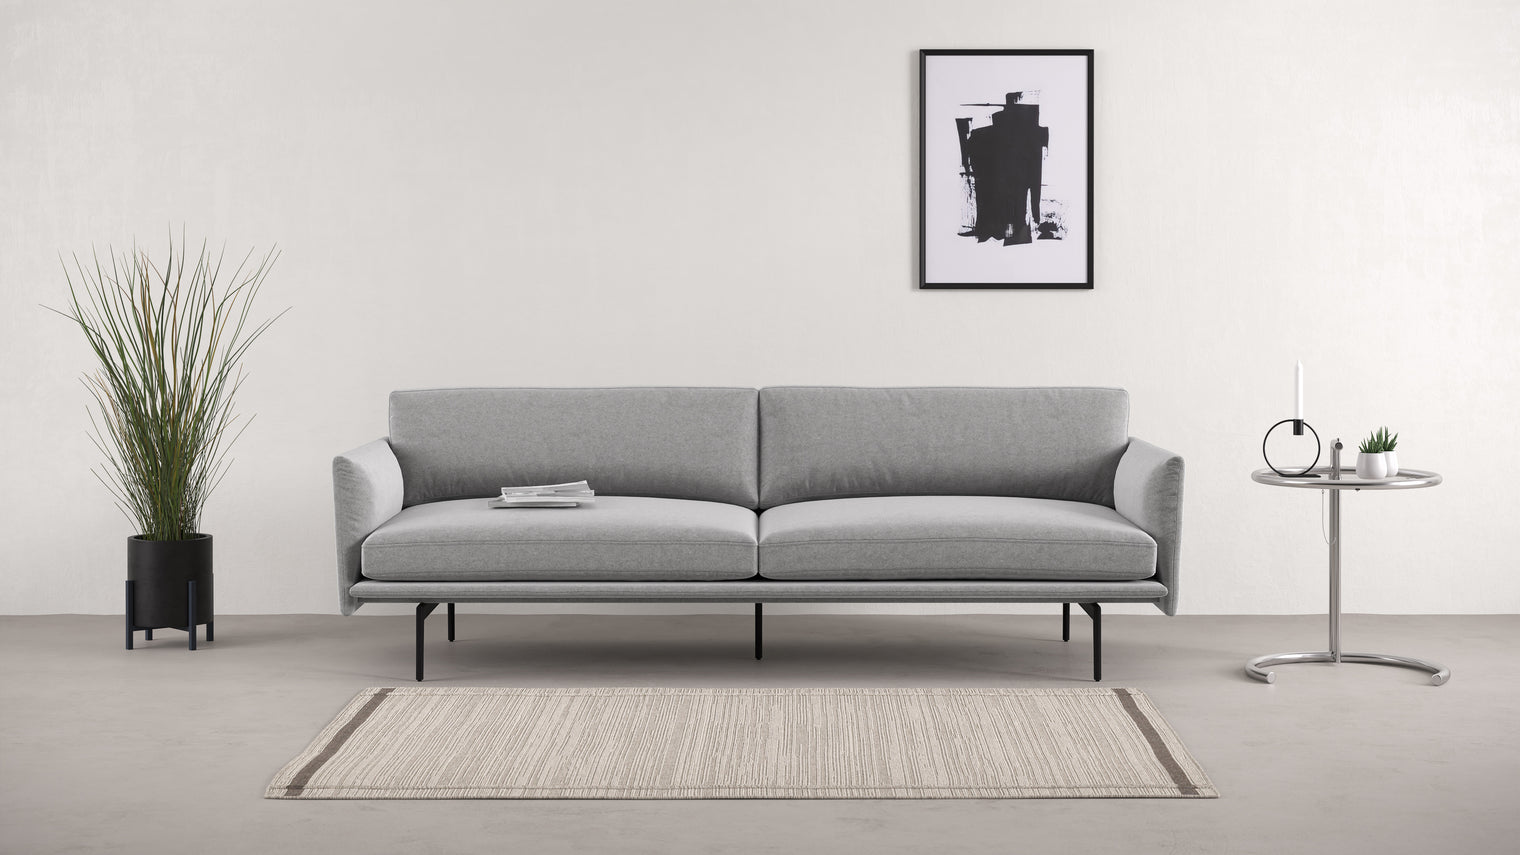 It Lives Up to the Name|With clean lines inspired by architecture and inwardly curved armrests that offer understated elegance, the Toriko Three-Person Sofa is named for obvious reasons. Its distinct silhouette is simple, sophisticated, and certain to elevate its surroundings.
